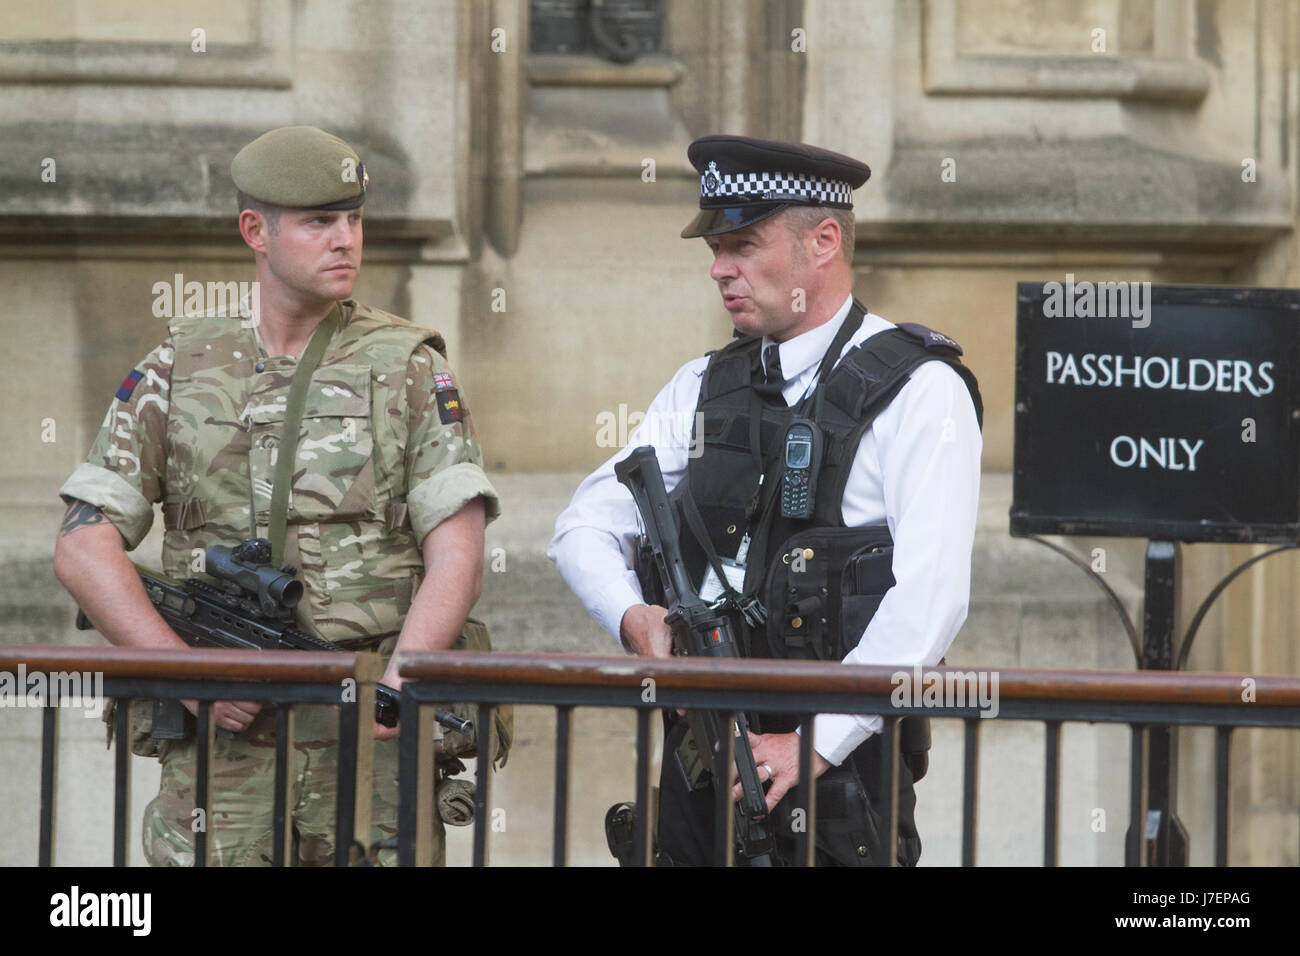 London UK. 24th May 2017. British Army soldiers are deployed   as part of Operation Tempora to guard Houses of Parliament and key sites  in London after the Terror threat level was raised to critical following the Manchester terror attacks Credit: amer ghazzal/Alamy Live News Stock Photo